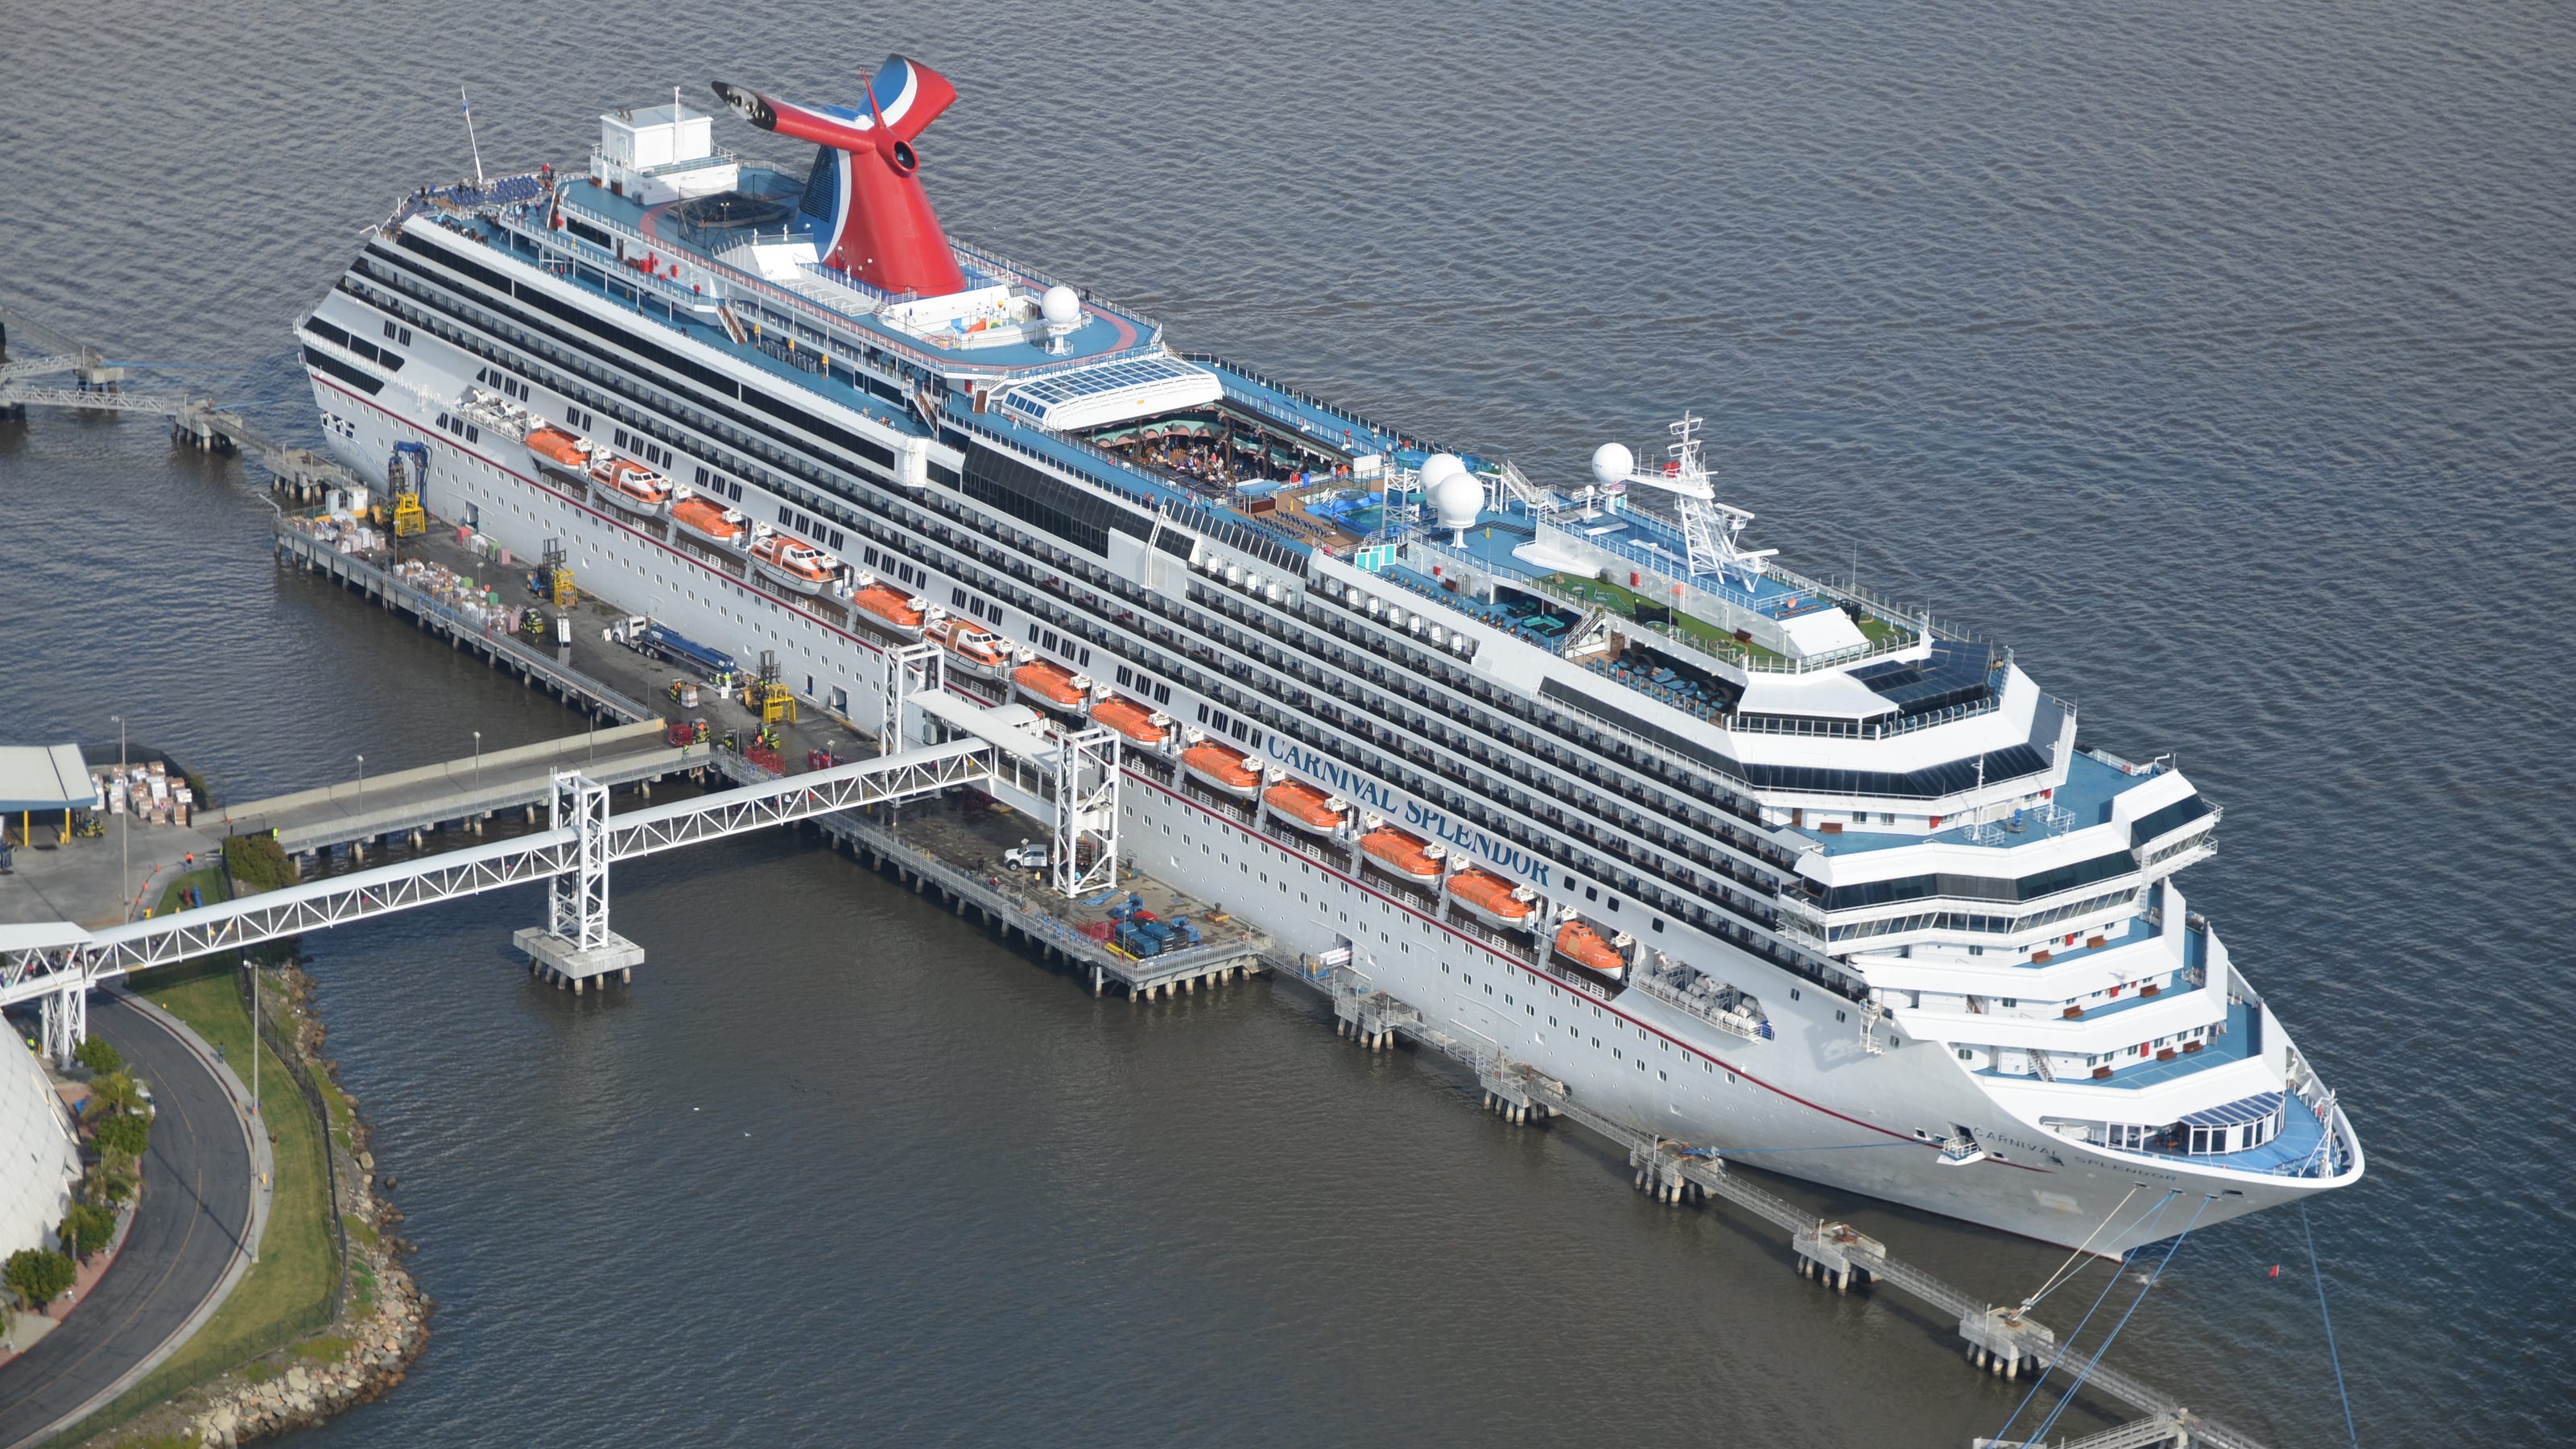 carnival cruise official site